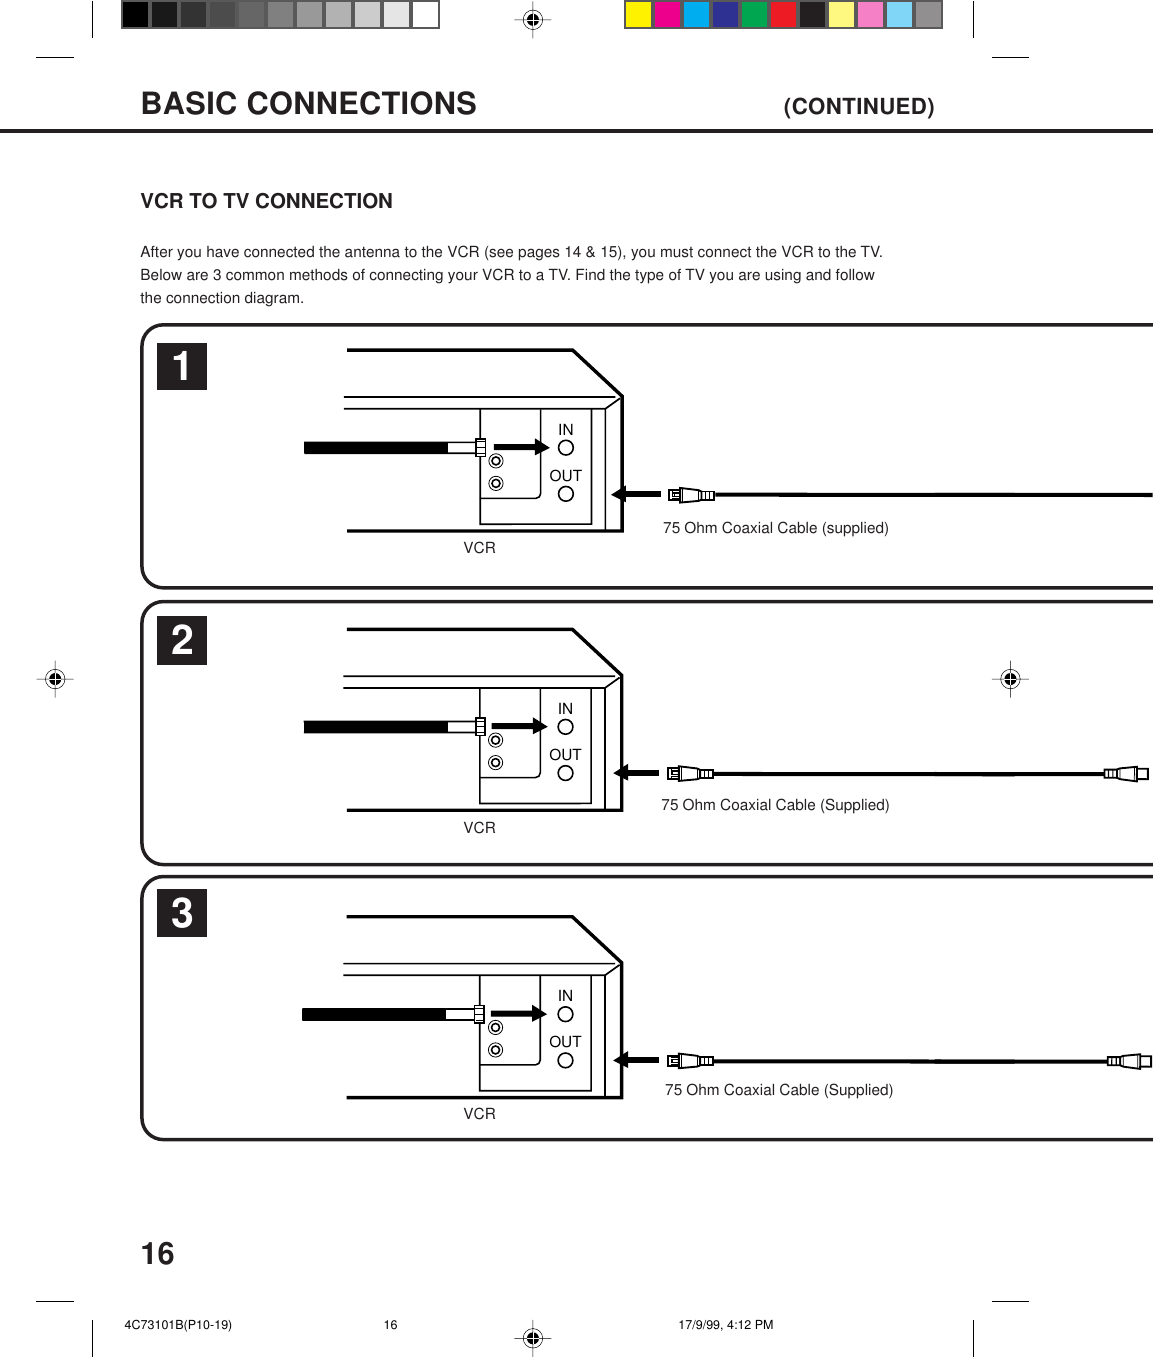 16OUTINOUTINOUTINVCR TO TV CONNECTIONAfter you have connected the antenna to the VCR (see pages 14 &amp; 15), you must connect the VCR to the TV.Below are 3 common methods of connecting your VCR to a TV. Find the type of TV you are using and followthe connection diagram.213BASIC CONNECTIONS  (CONTINUED)75 Ohm Coaxial Cable (Supplied)75 Ohm Coaxial Cable (Supplied)75 Ohm Coaxial Cable (supplied)VCRVCRVCR 4C73101B(P10-19) 17/9/99, 4:12 PM16